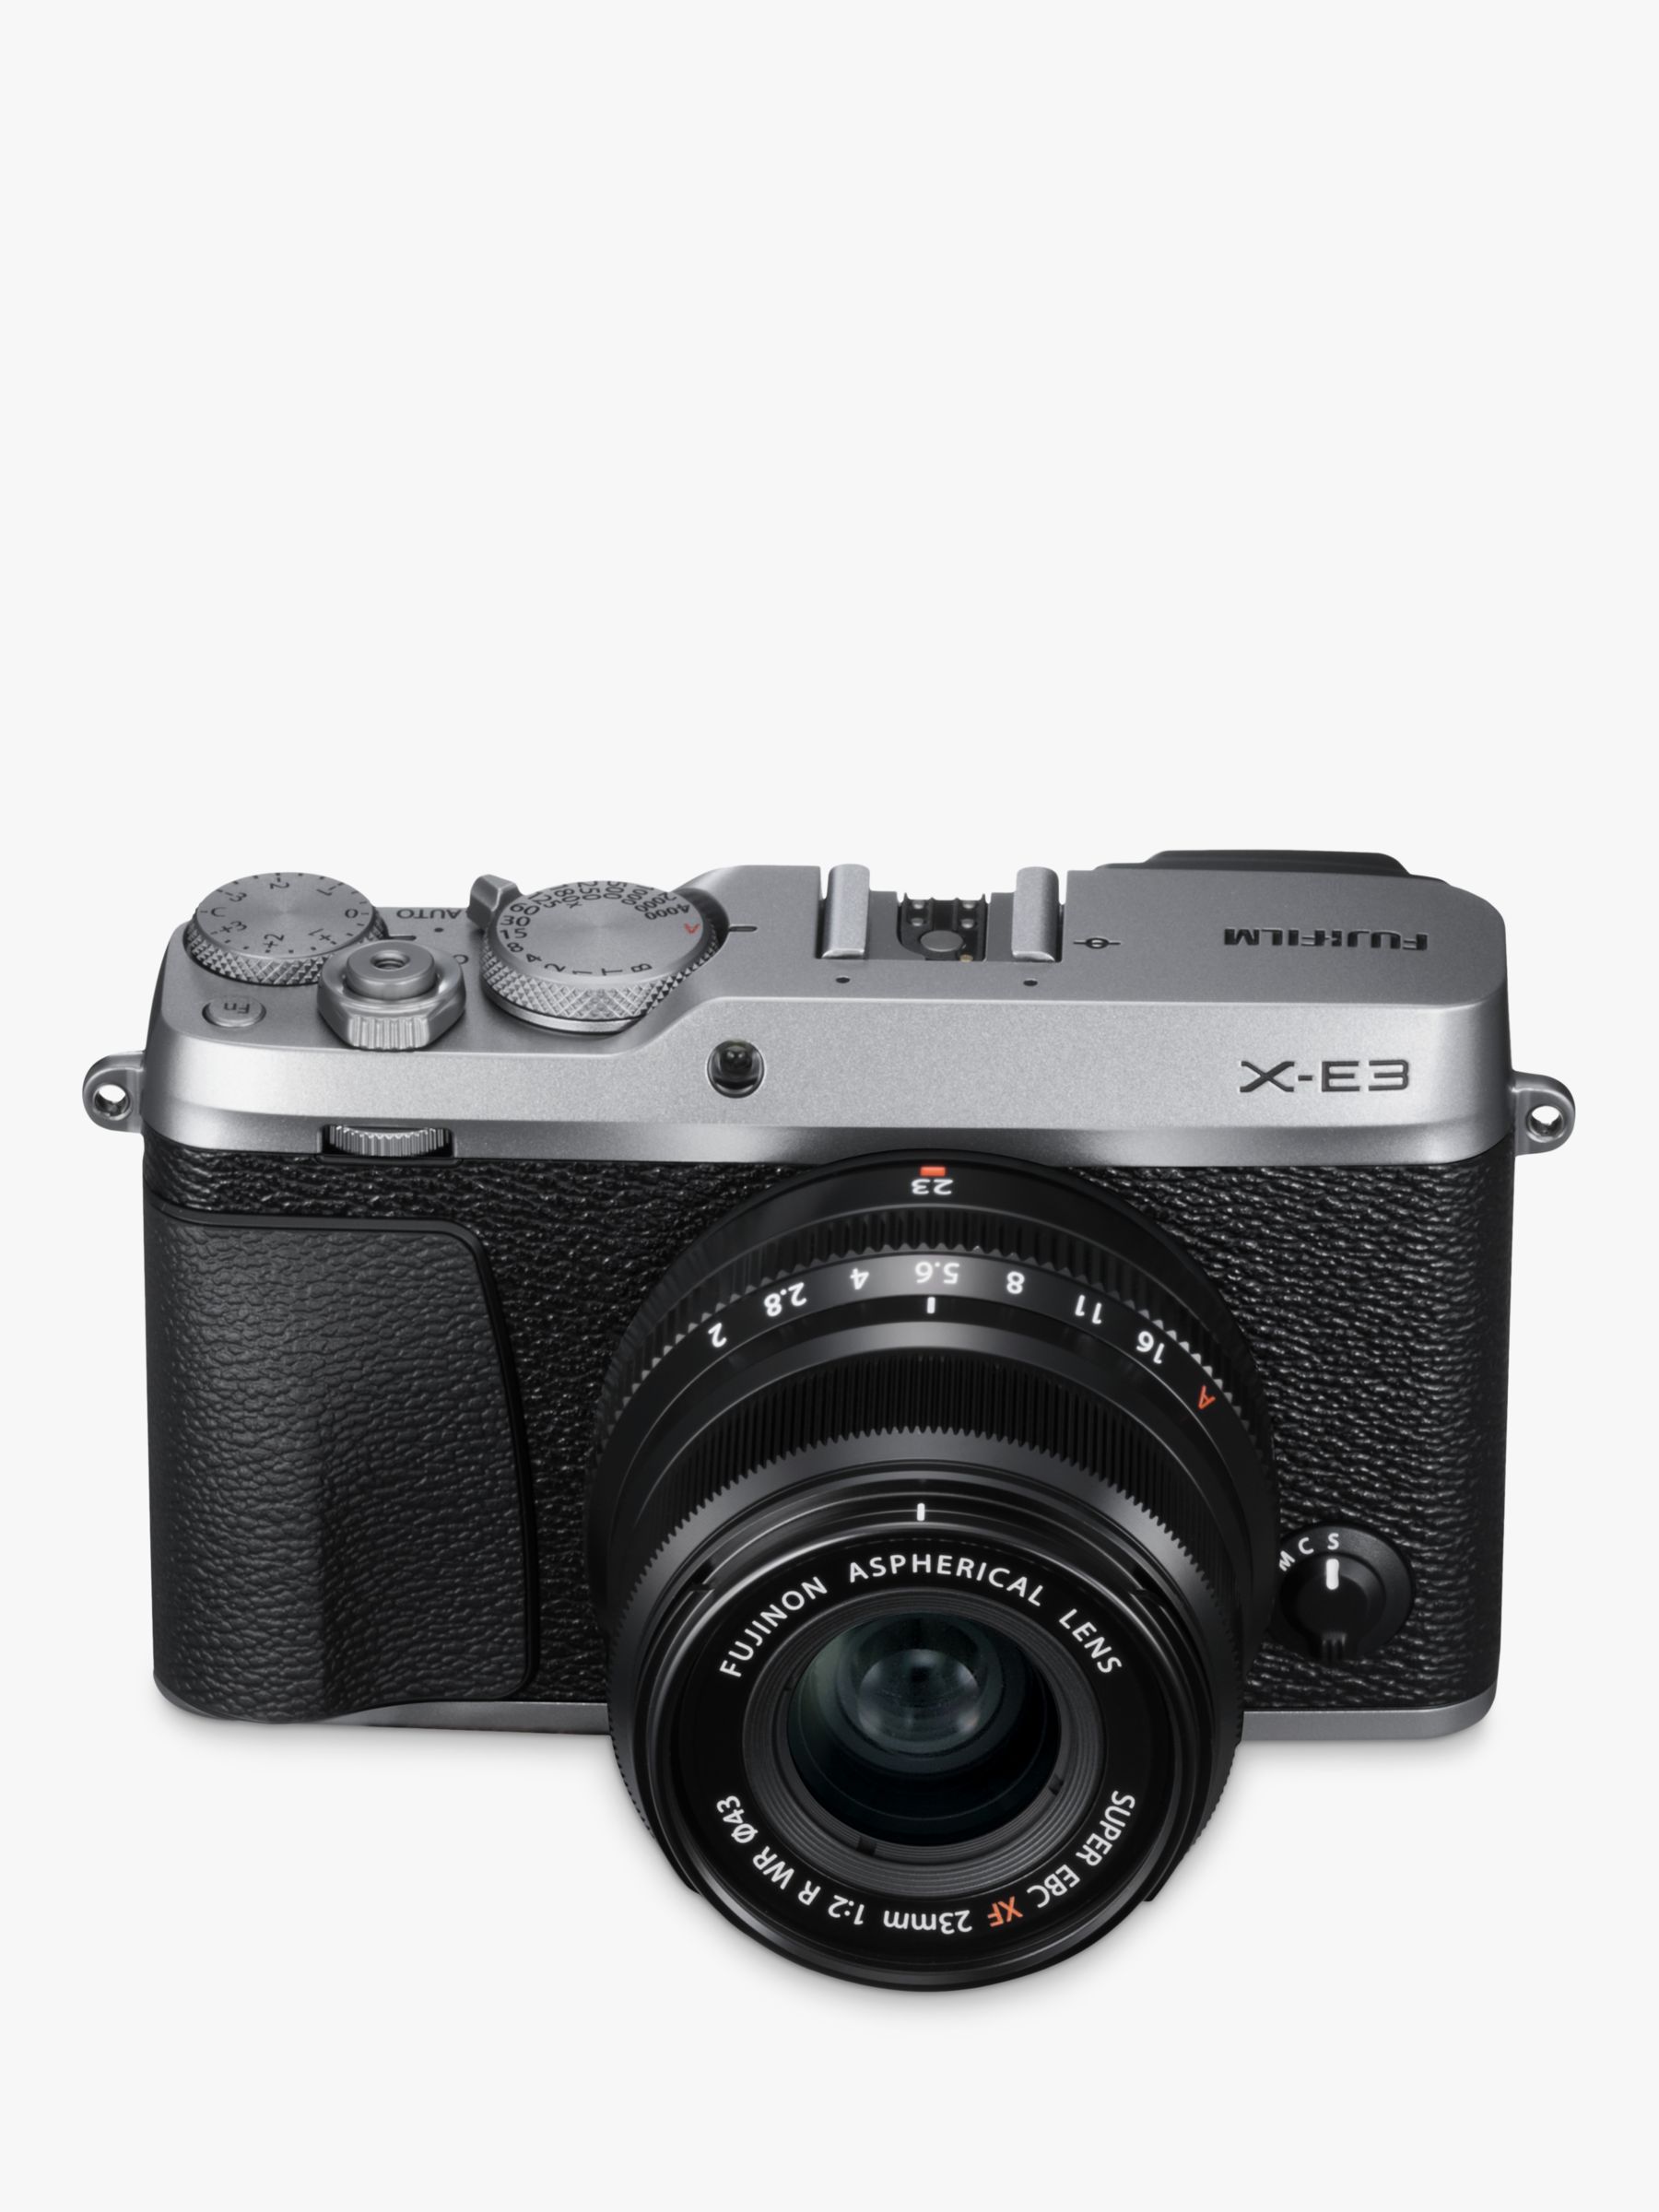 Fujifilm X-E3 Compact System Camera with XF 23mm Lens, 4K Ultra HD, 24.3MP, Wi-Fi, Bluetooth, OLED EVF, 3" LCD Touch Screen, Silver